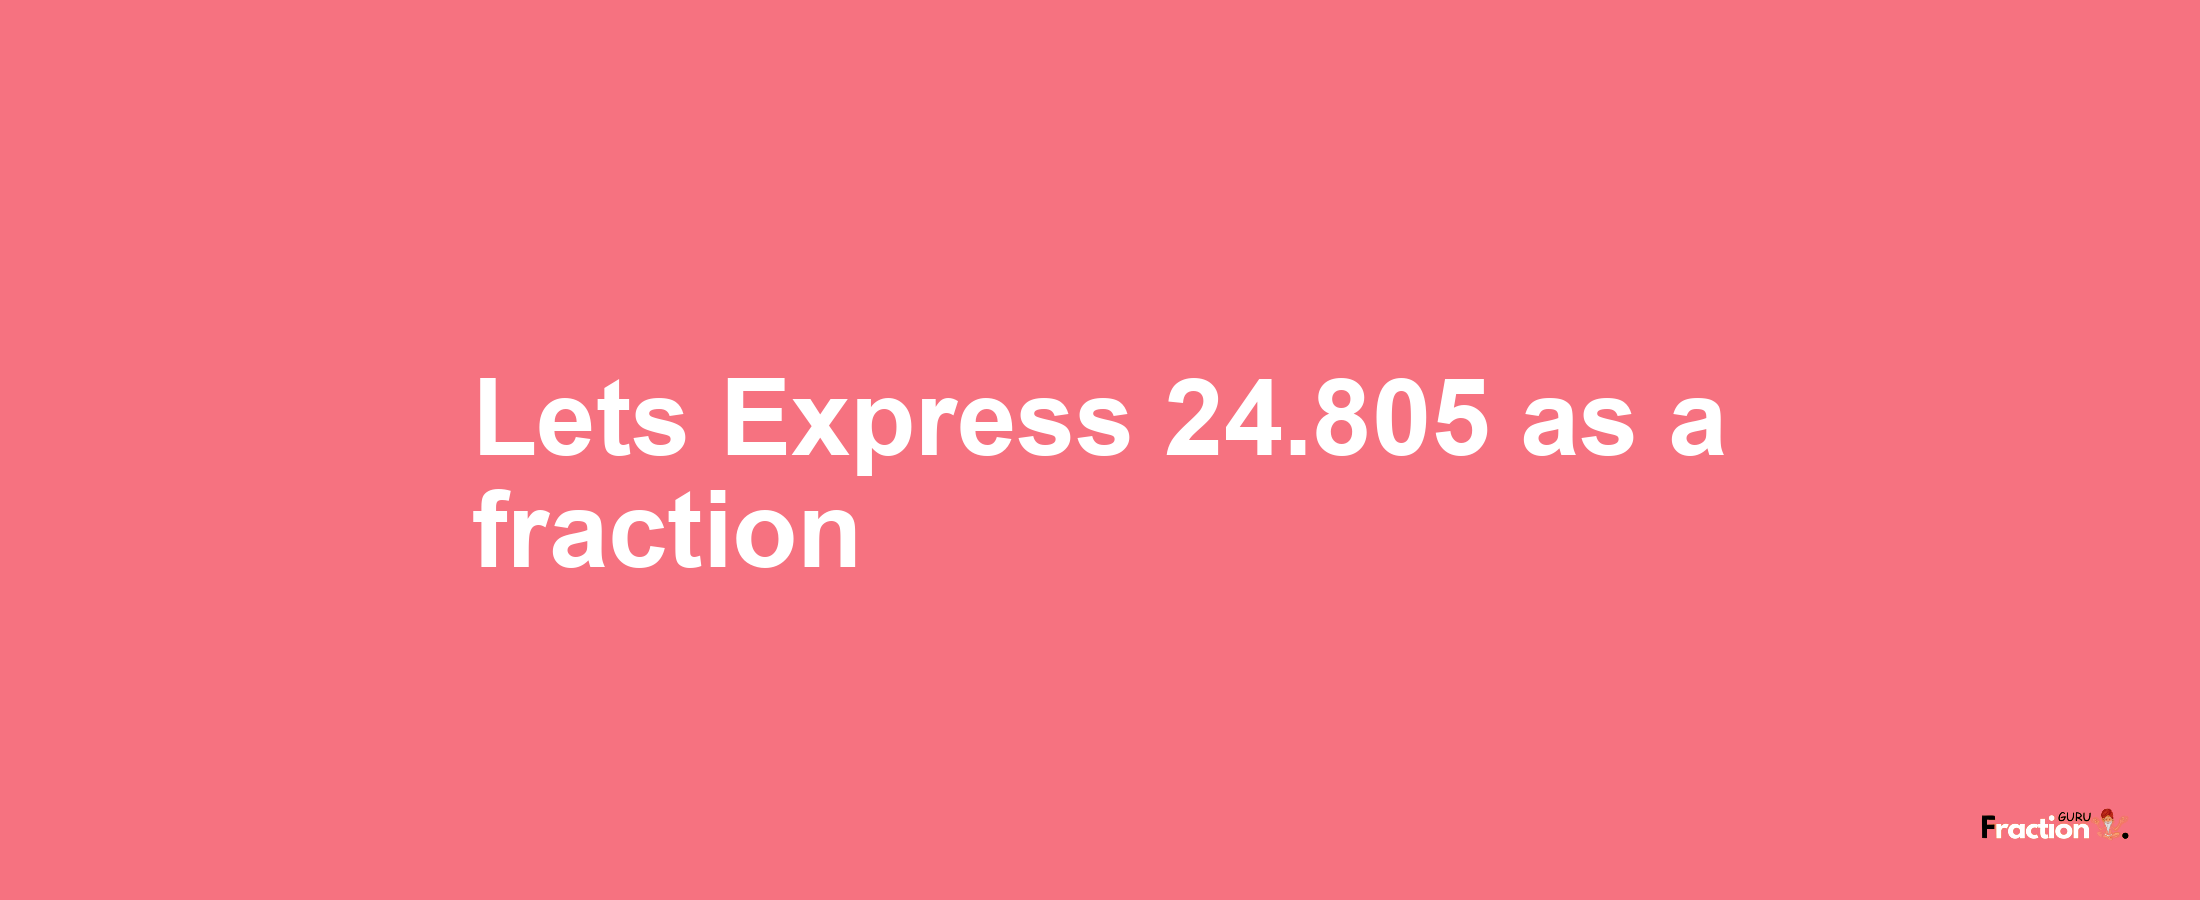 Lets Express 24.805 as afraction